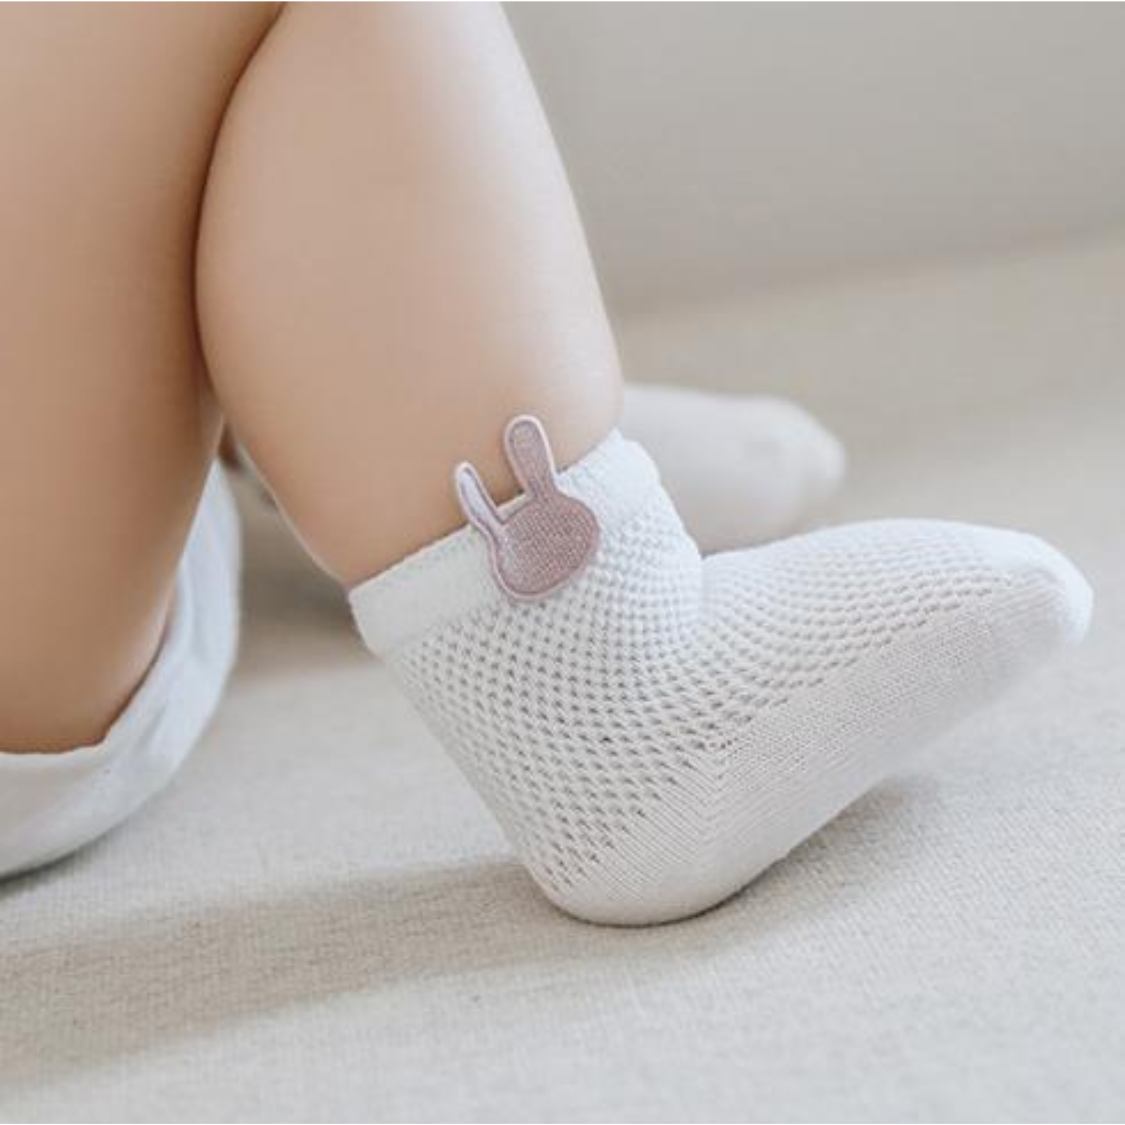 Cute Animal Character Anti-Slip Baby Short Socks - Soft Cotton, Ideal for Newborns and Toddlers